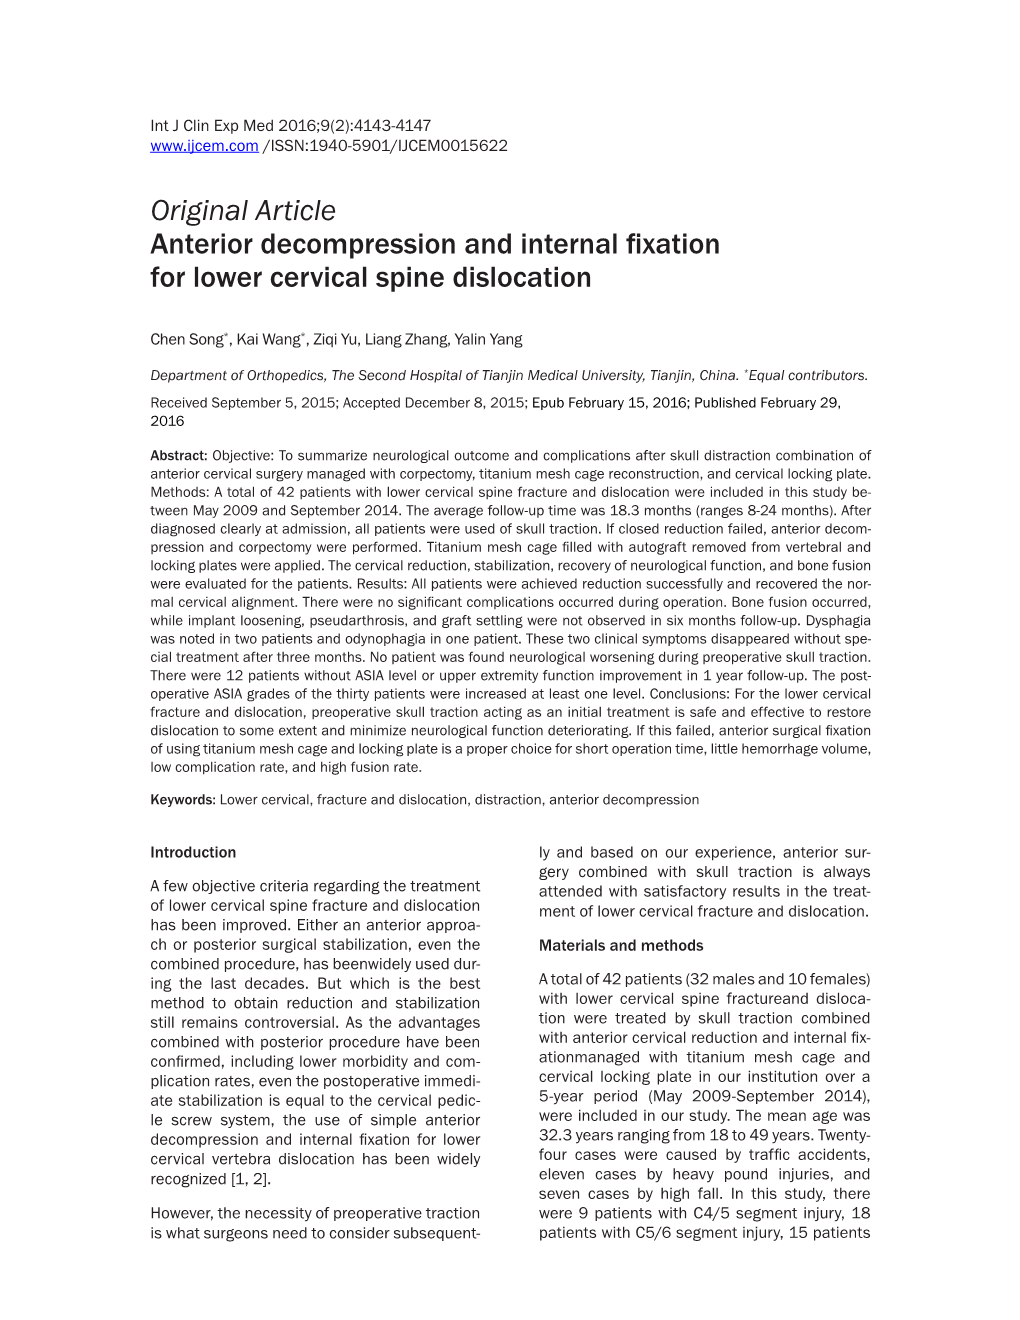 Original Article Anterior Decompression and Internal Fixation for Lower Cervical Spine Dislocation